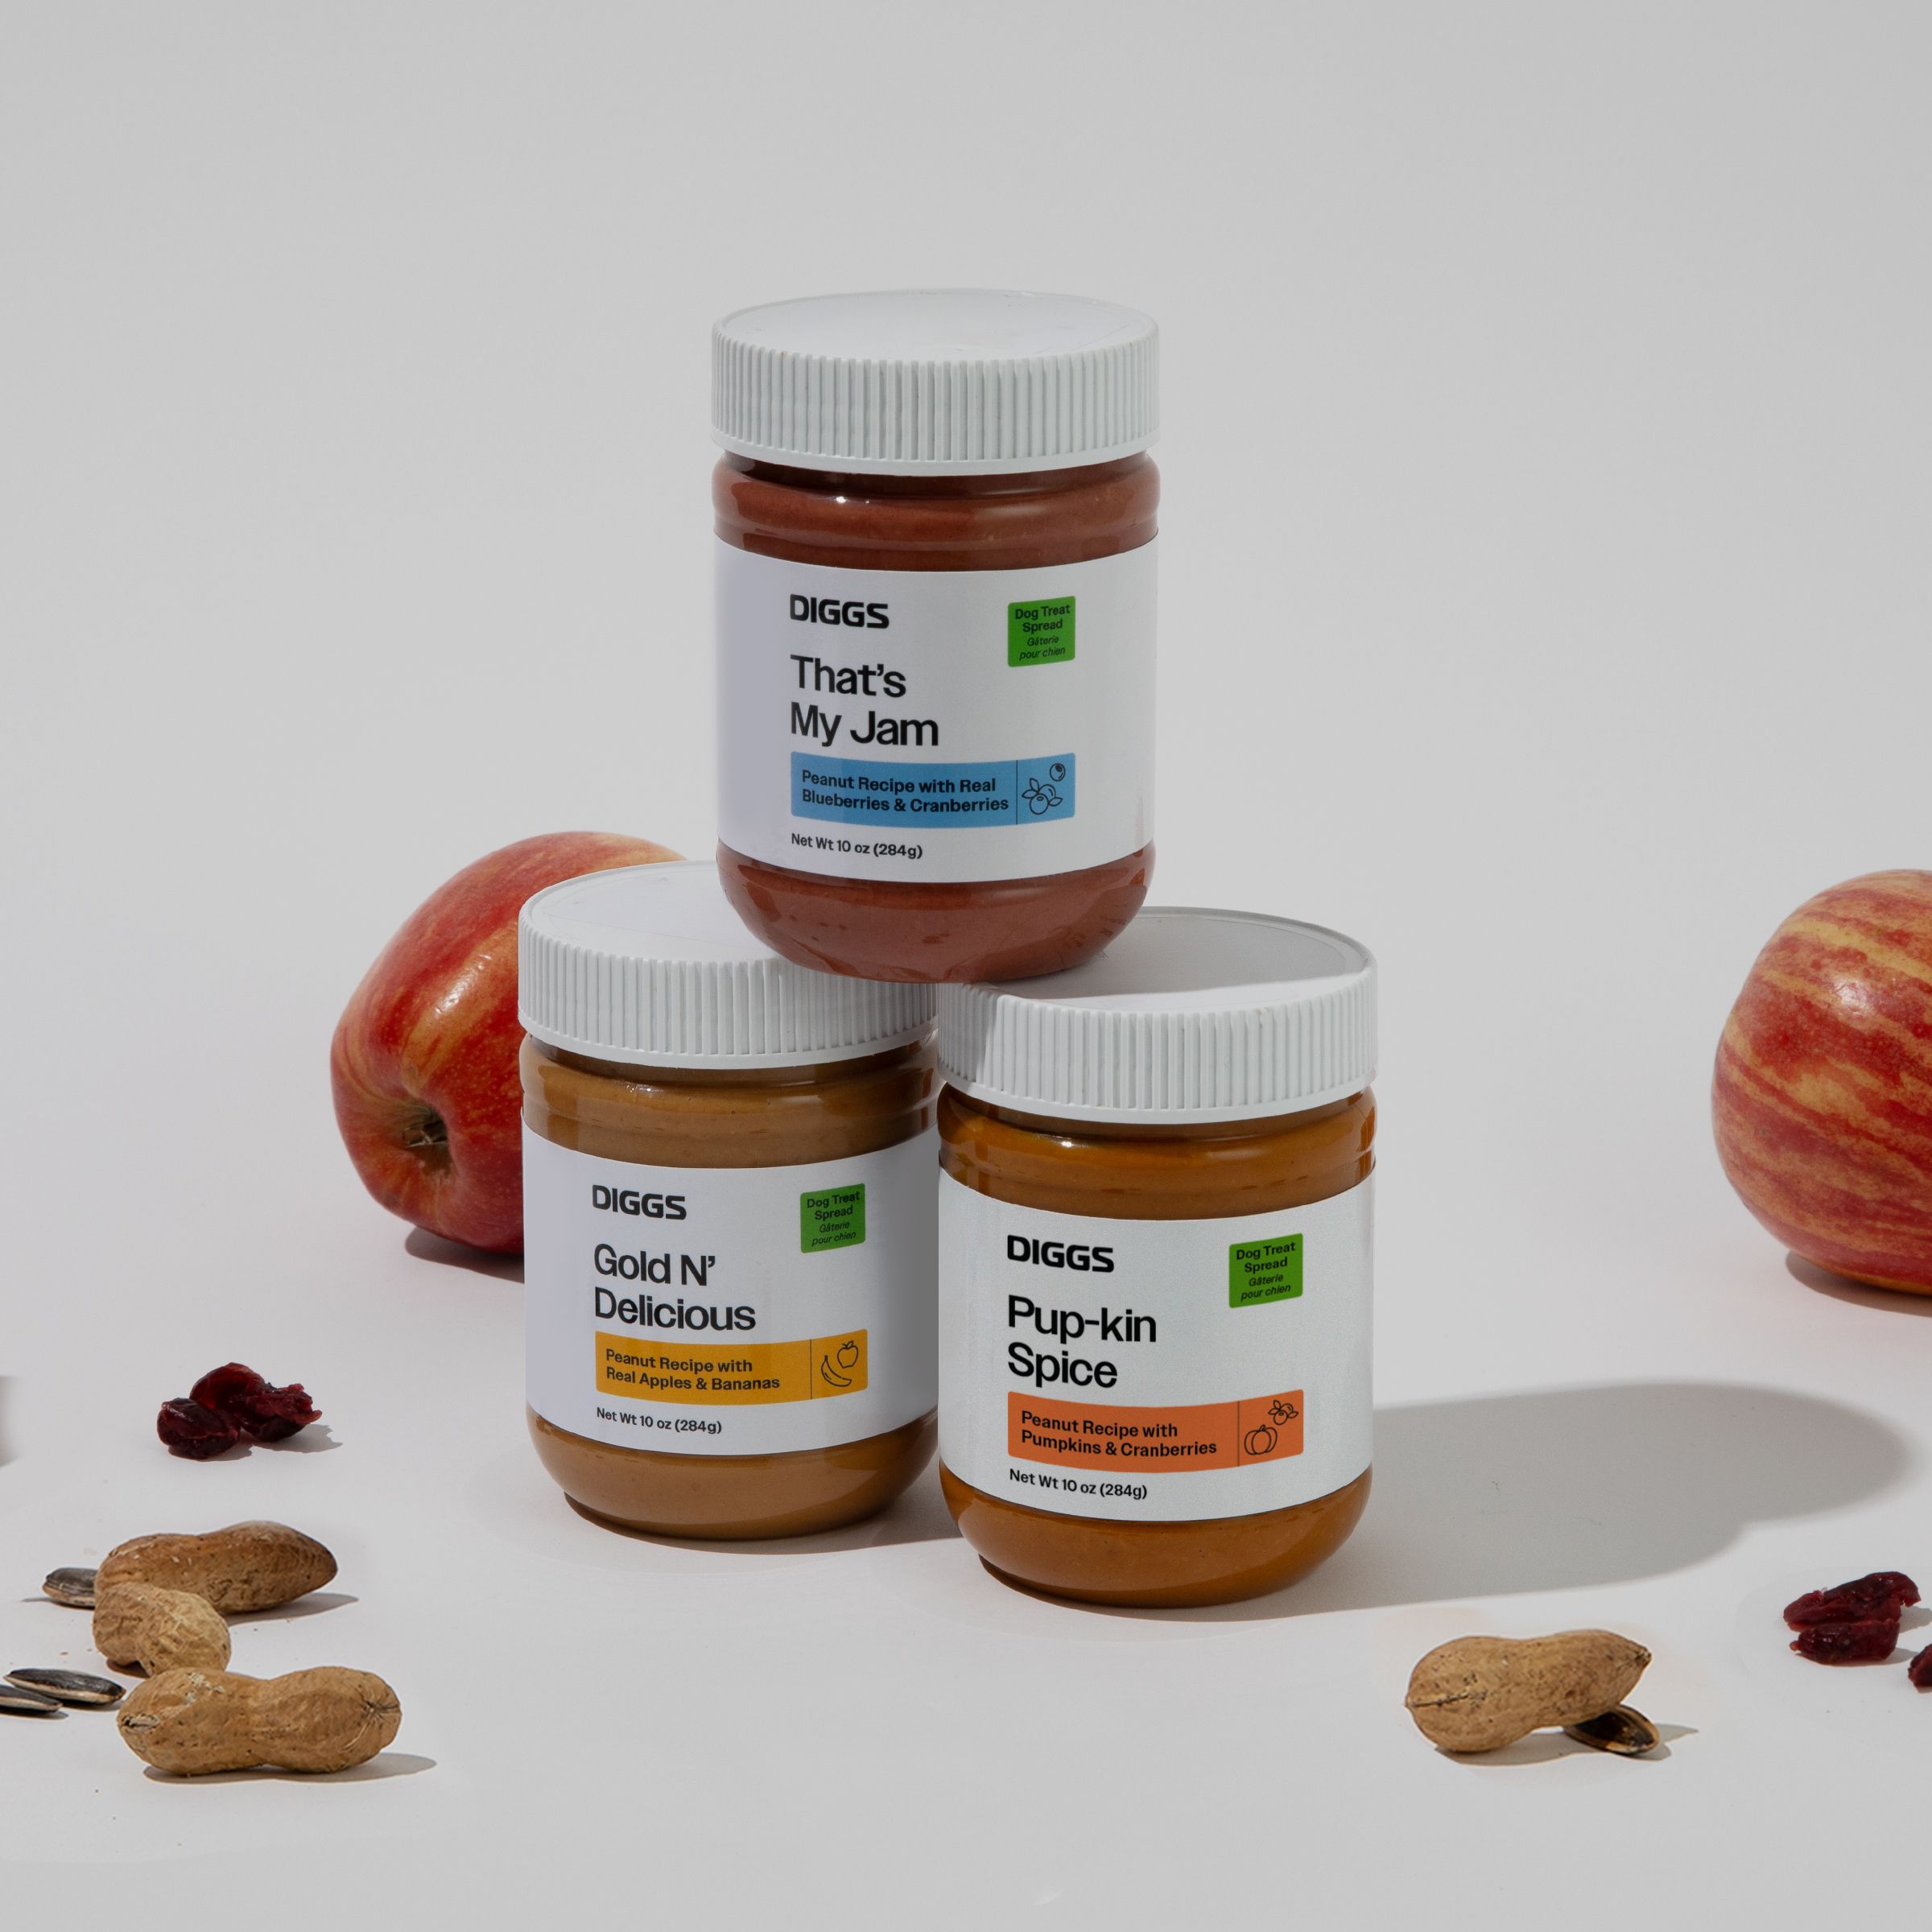 All three flavors of Diggs Treat Spreads on a white background with apples, cranberries, and pumpkin seeds